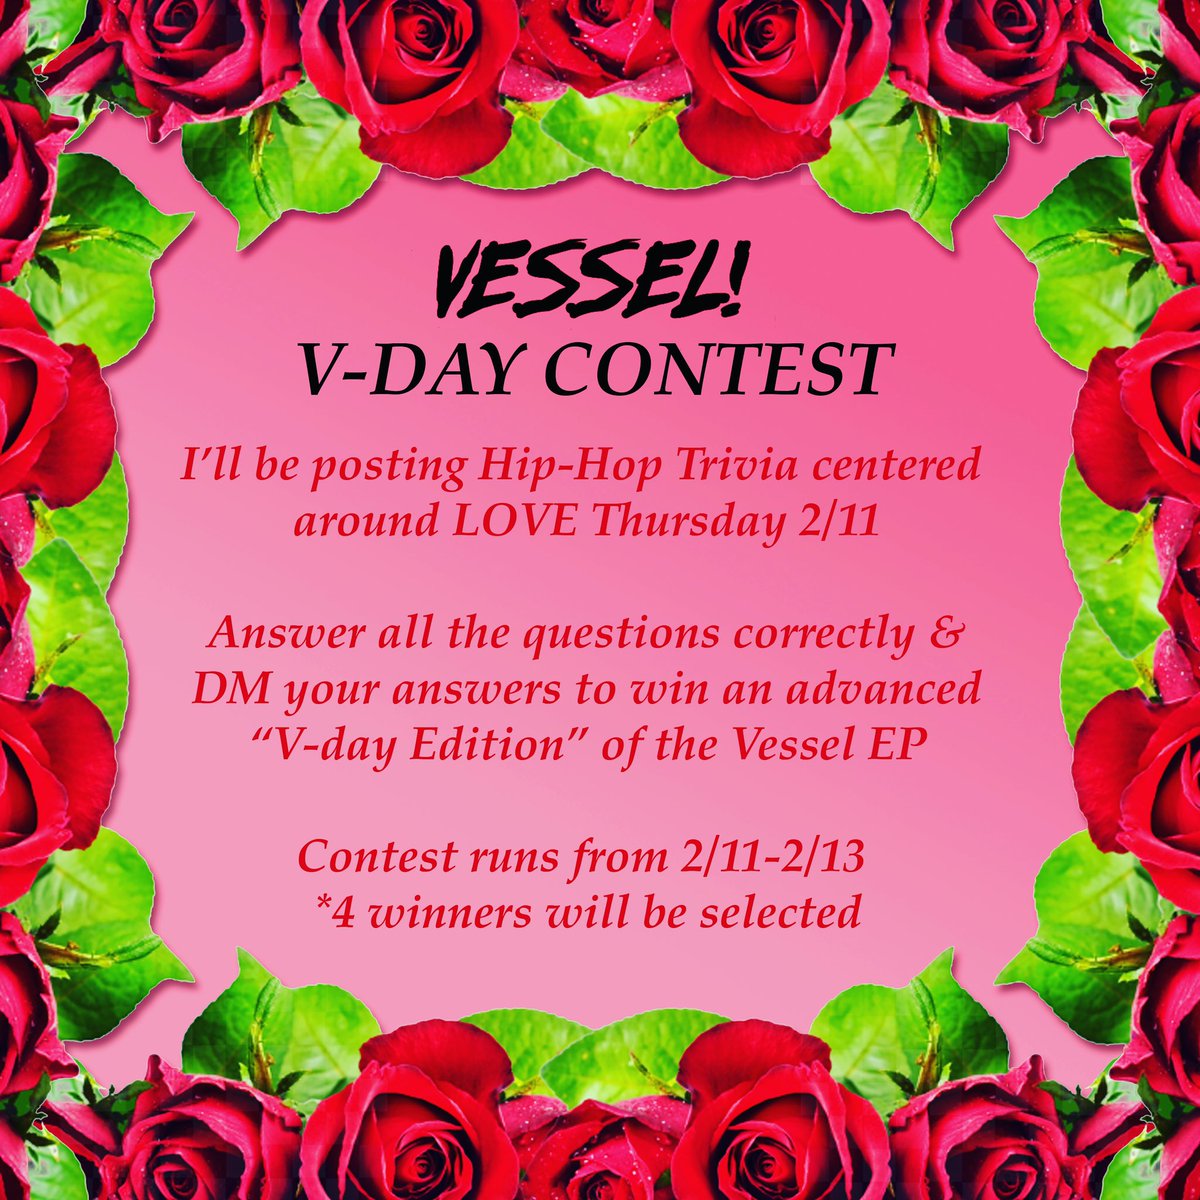 ❤️❤️Next week it begins! Earn a chance to win a special “V-Day Edition” of the Vessel EP. #dotheknowledge